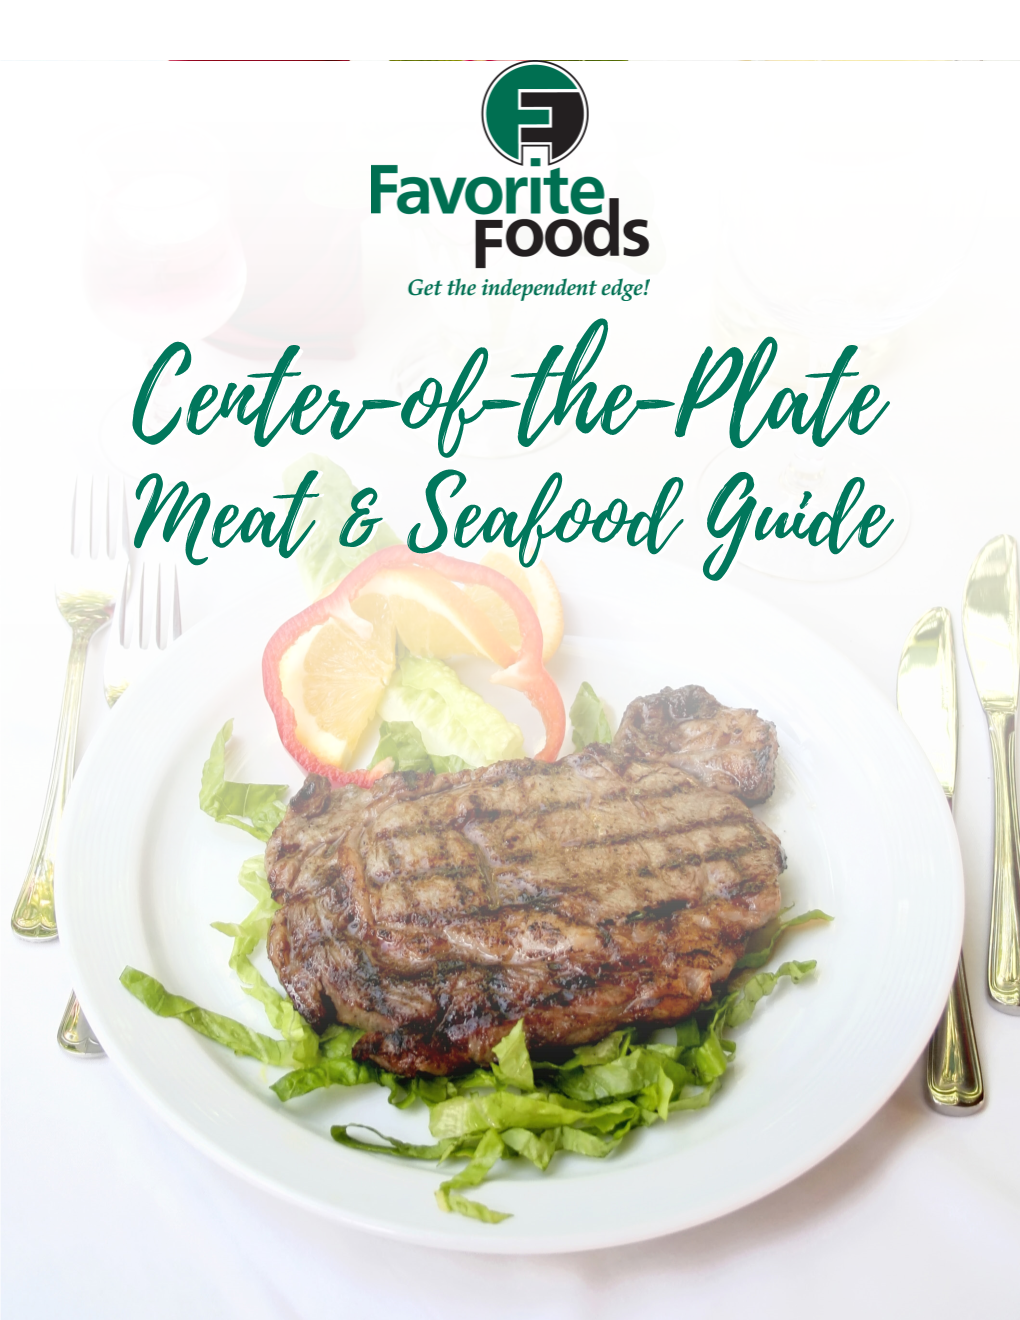 Center-Of-The-Platecenter-Of-The-Plate Meatmeat && Seafoodseafood Guideguide Table of Contents